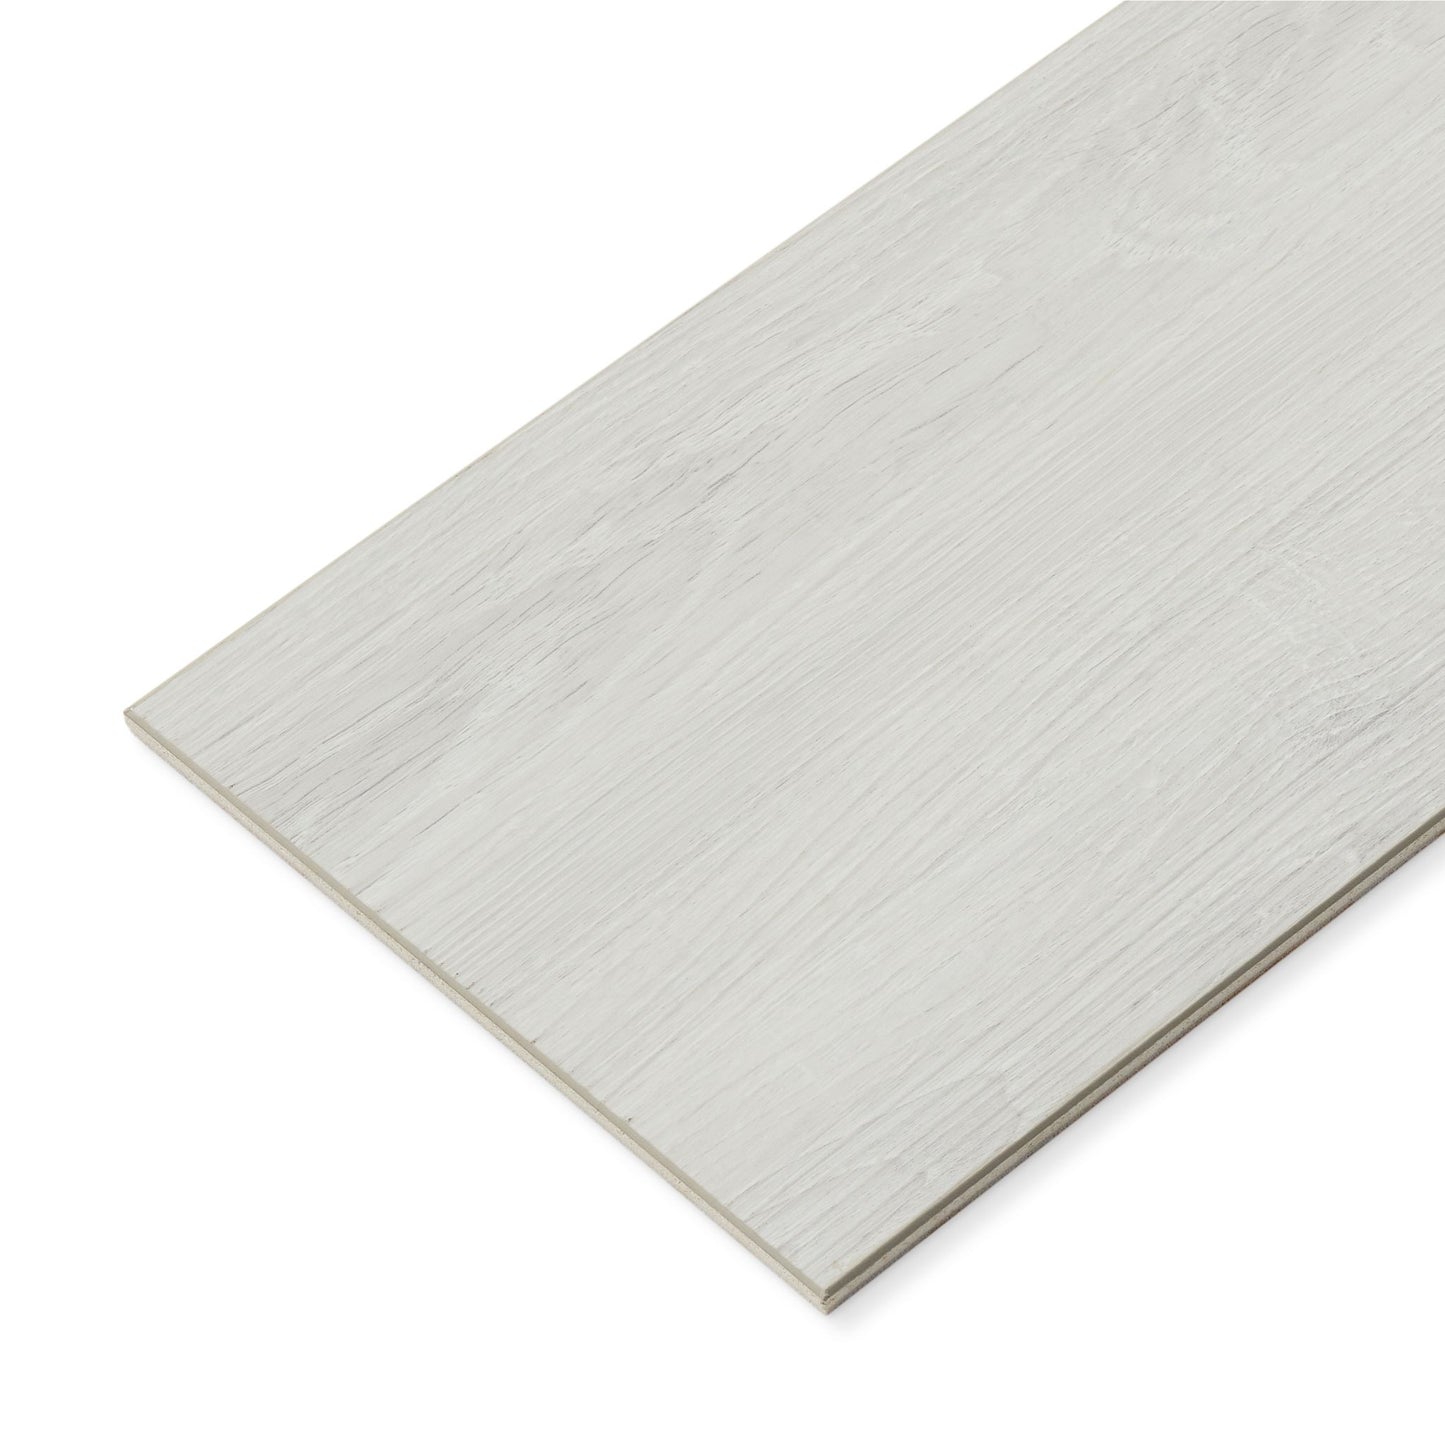 StickWall White Maple Wall Panel - 1.7sqm Pack